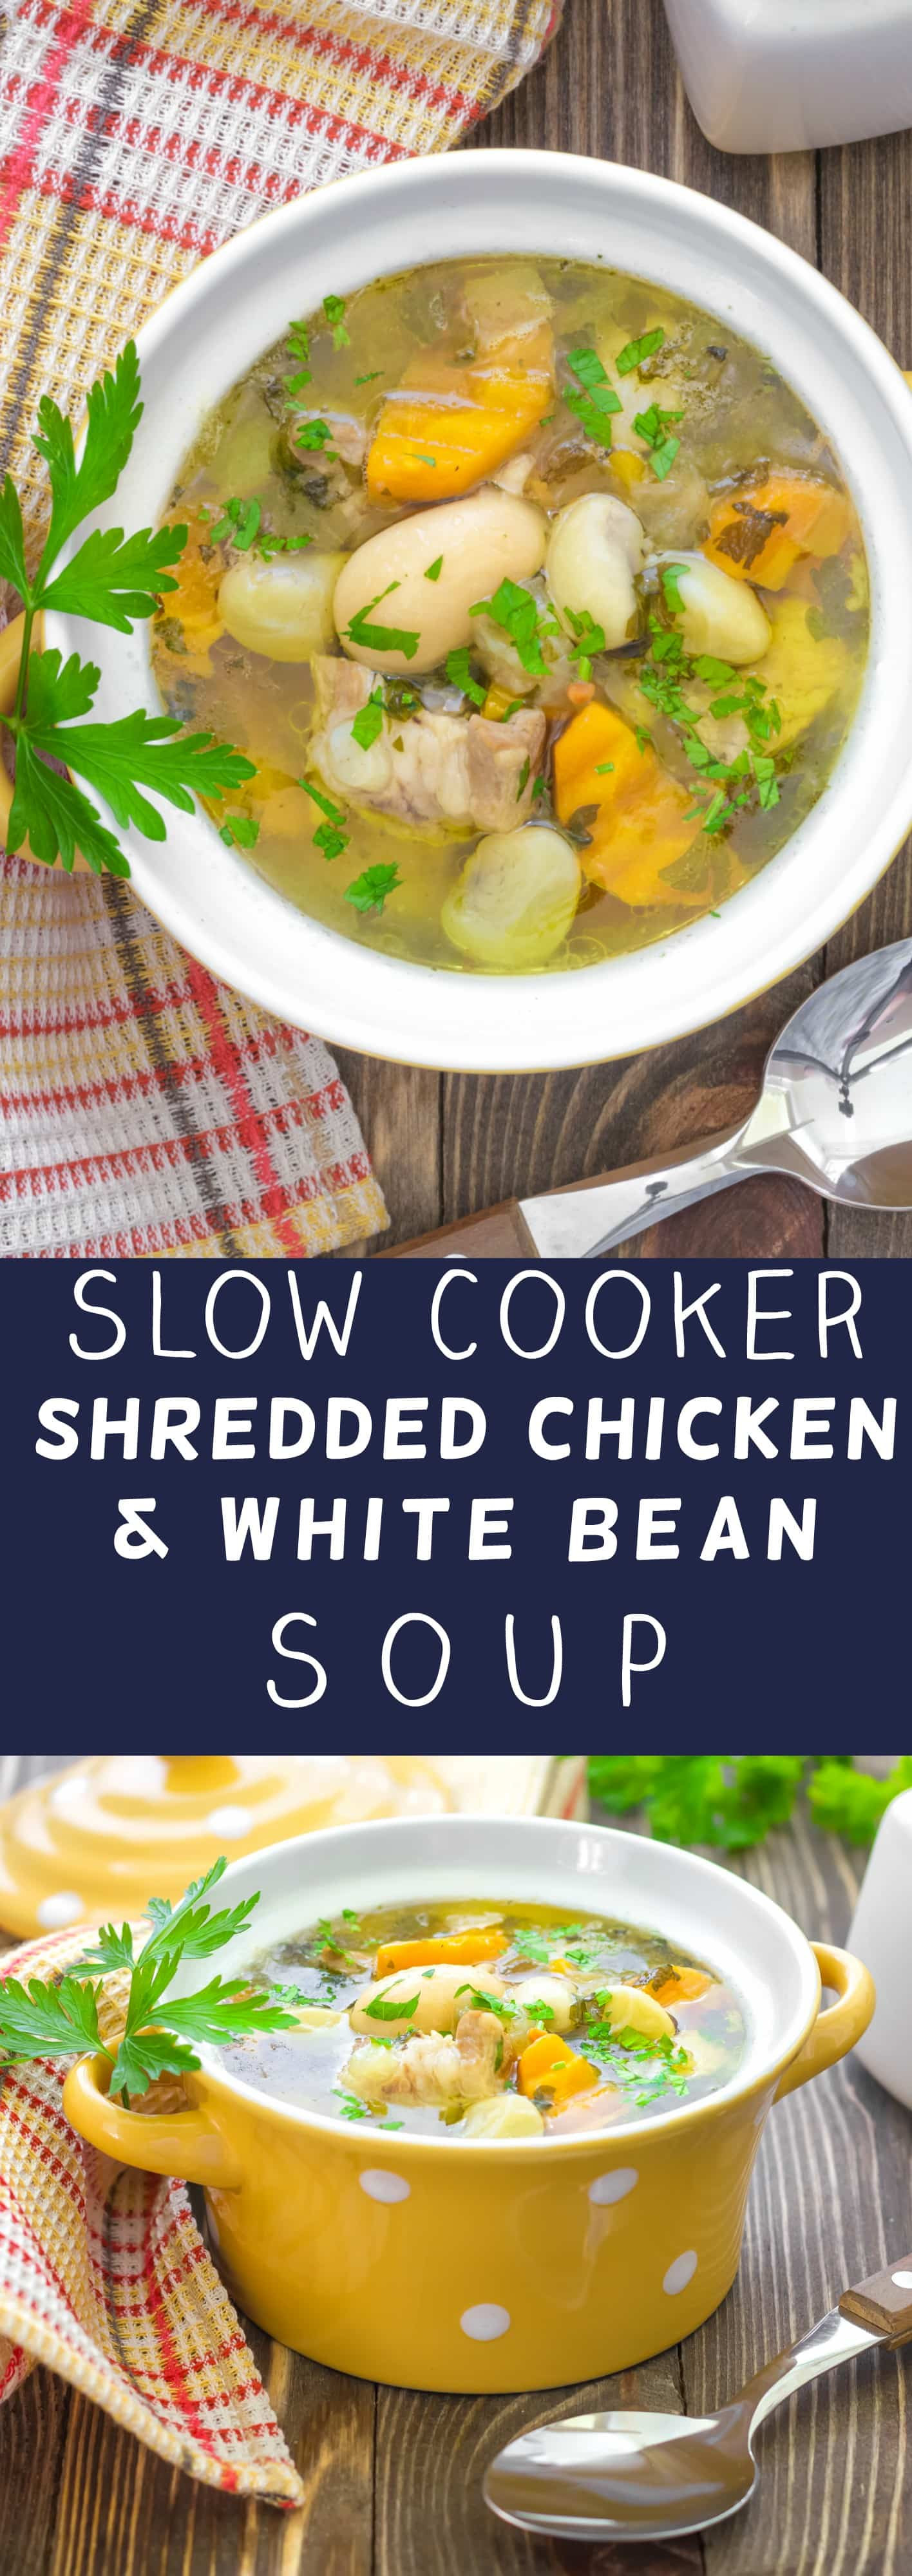 Chicken And Bean Soup
 Slow Cooker Shredded Chicken and White Bean Soup